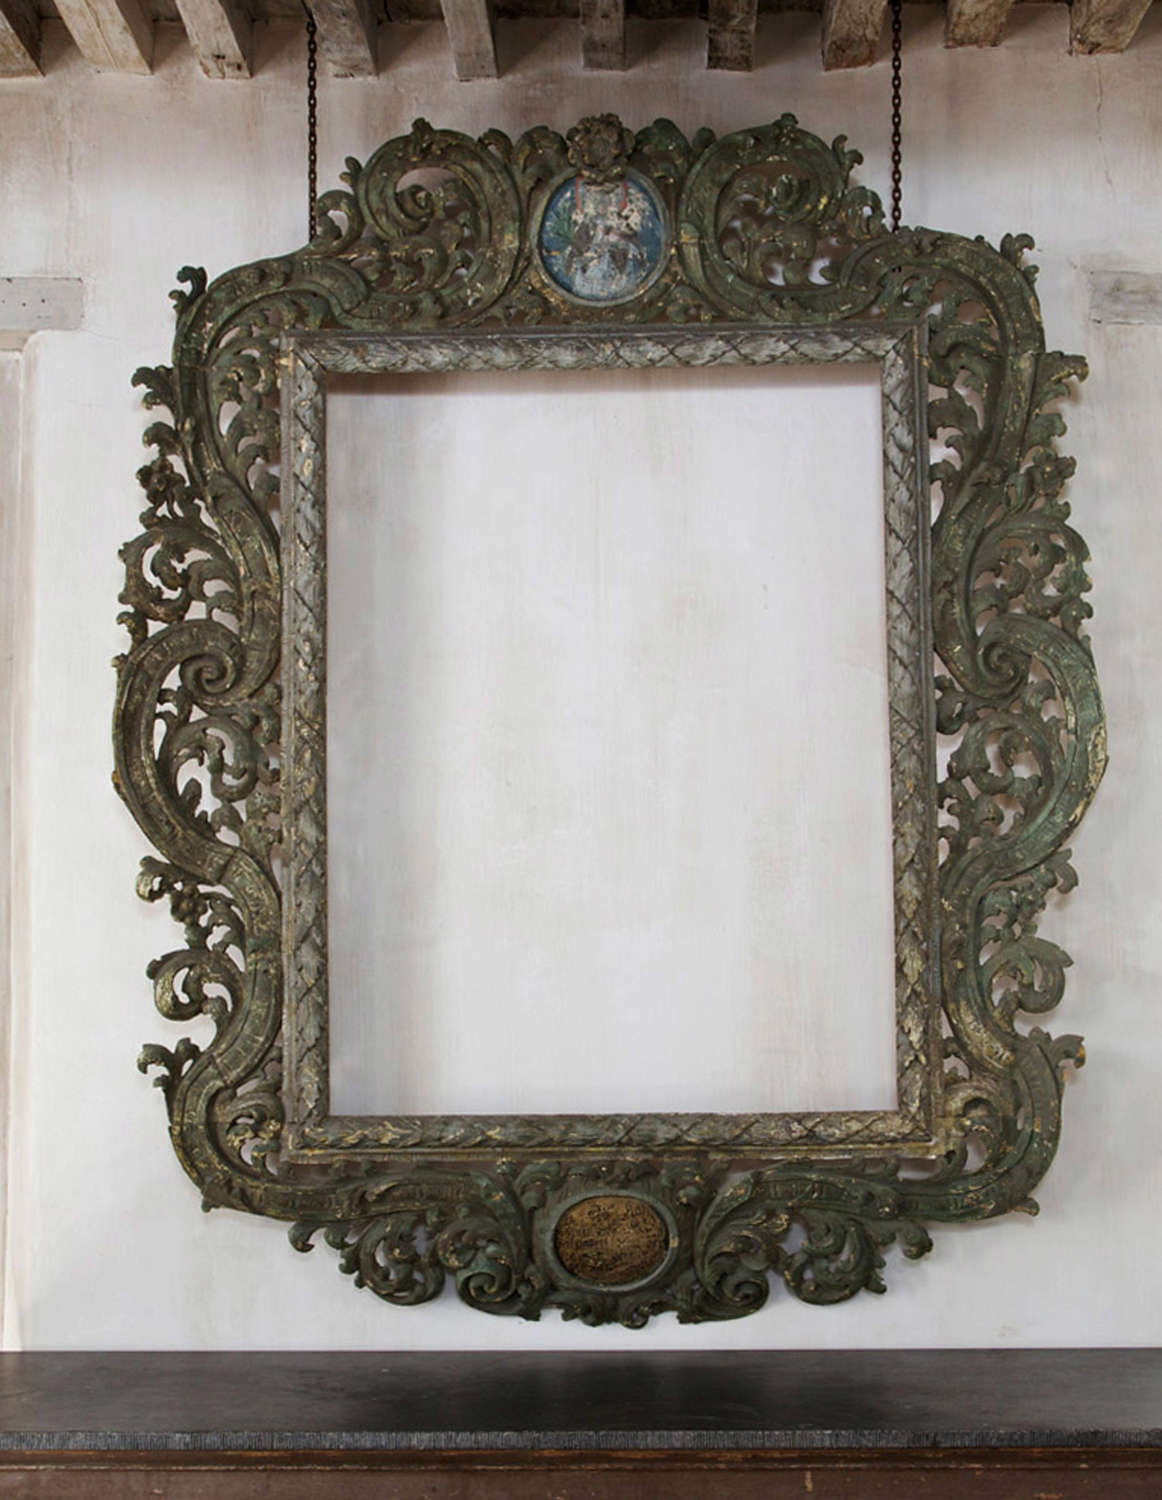 18th century large Austrian Baroque carved wooden frame